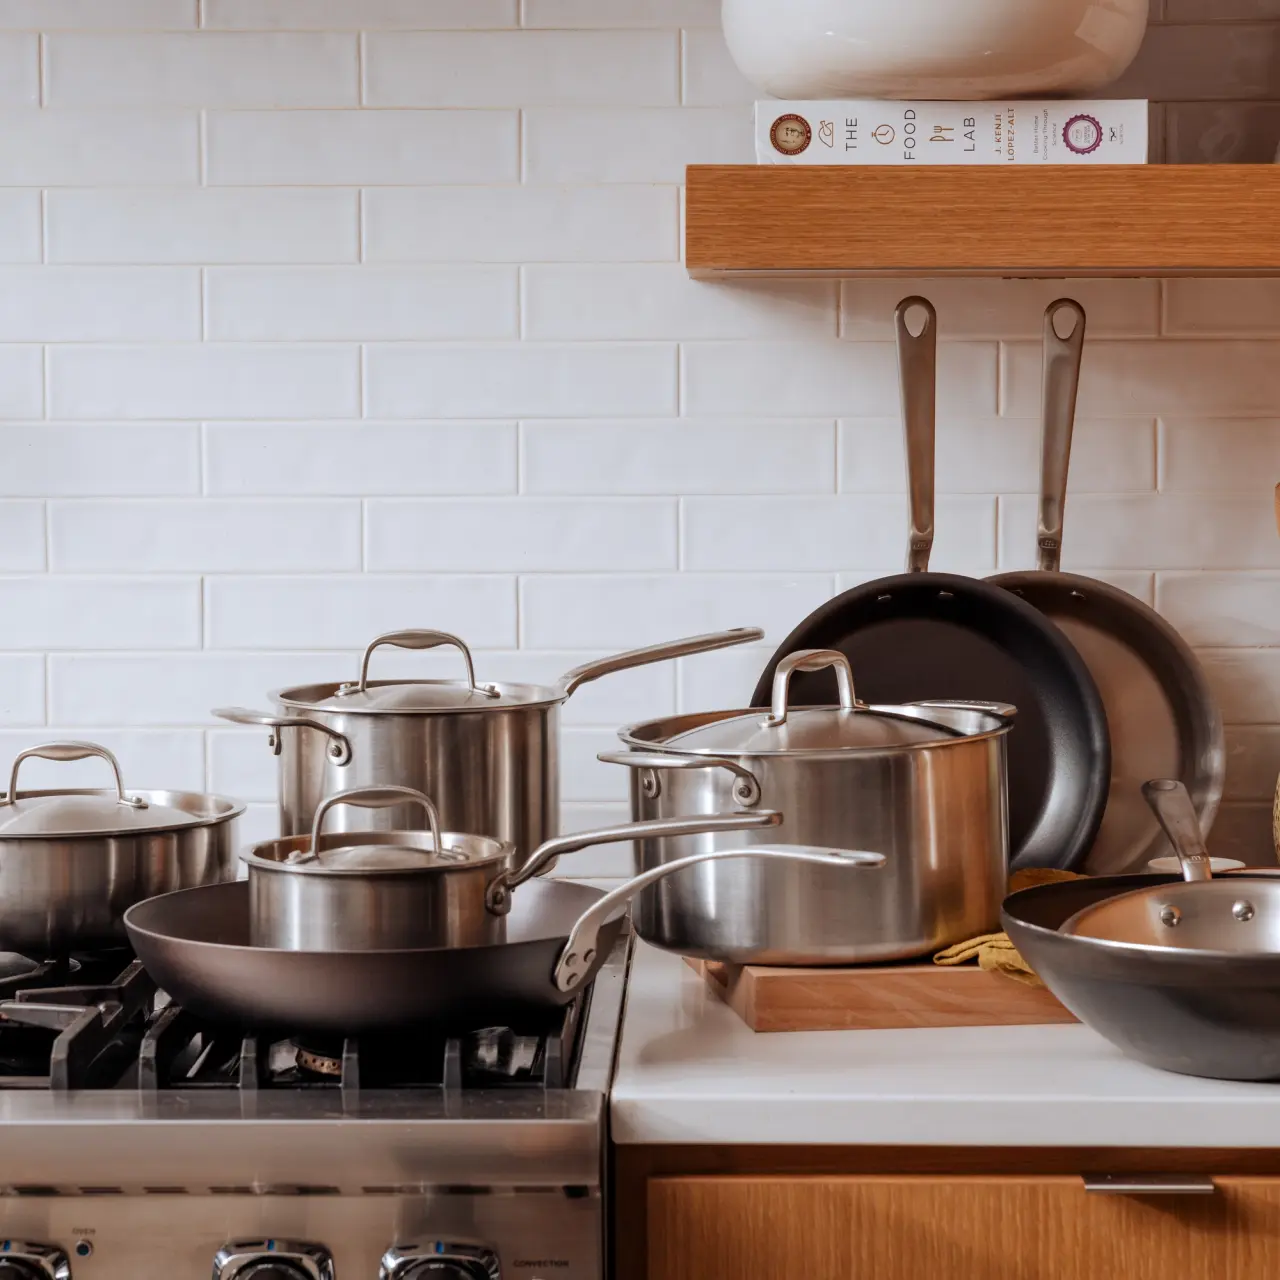 A variety of stainless steel and non-stick cookware is neatly arranged on a stovetop and counter in a kitchen with white subway tile backsplash and wooden shelves.